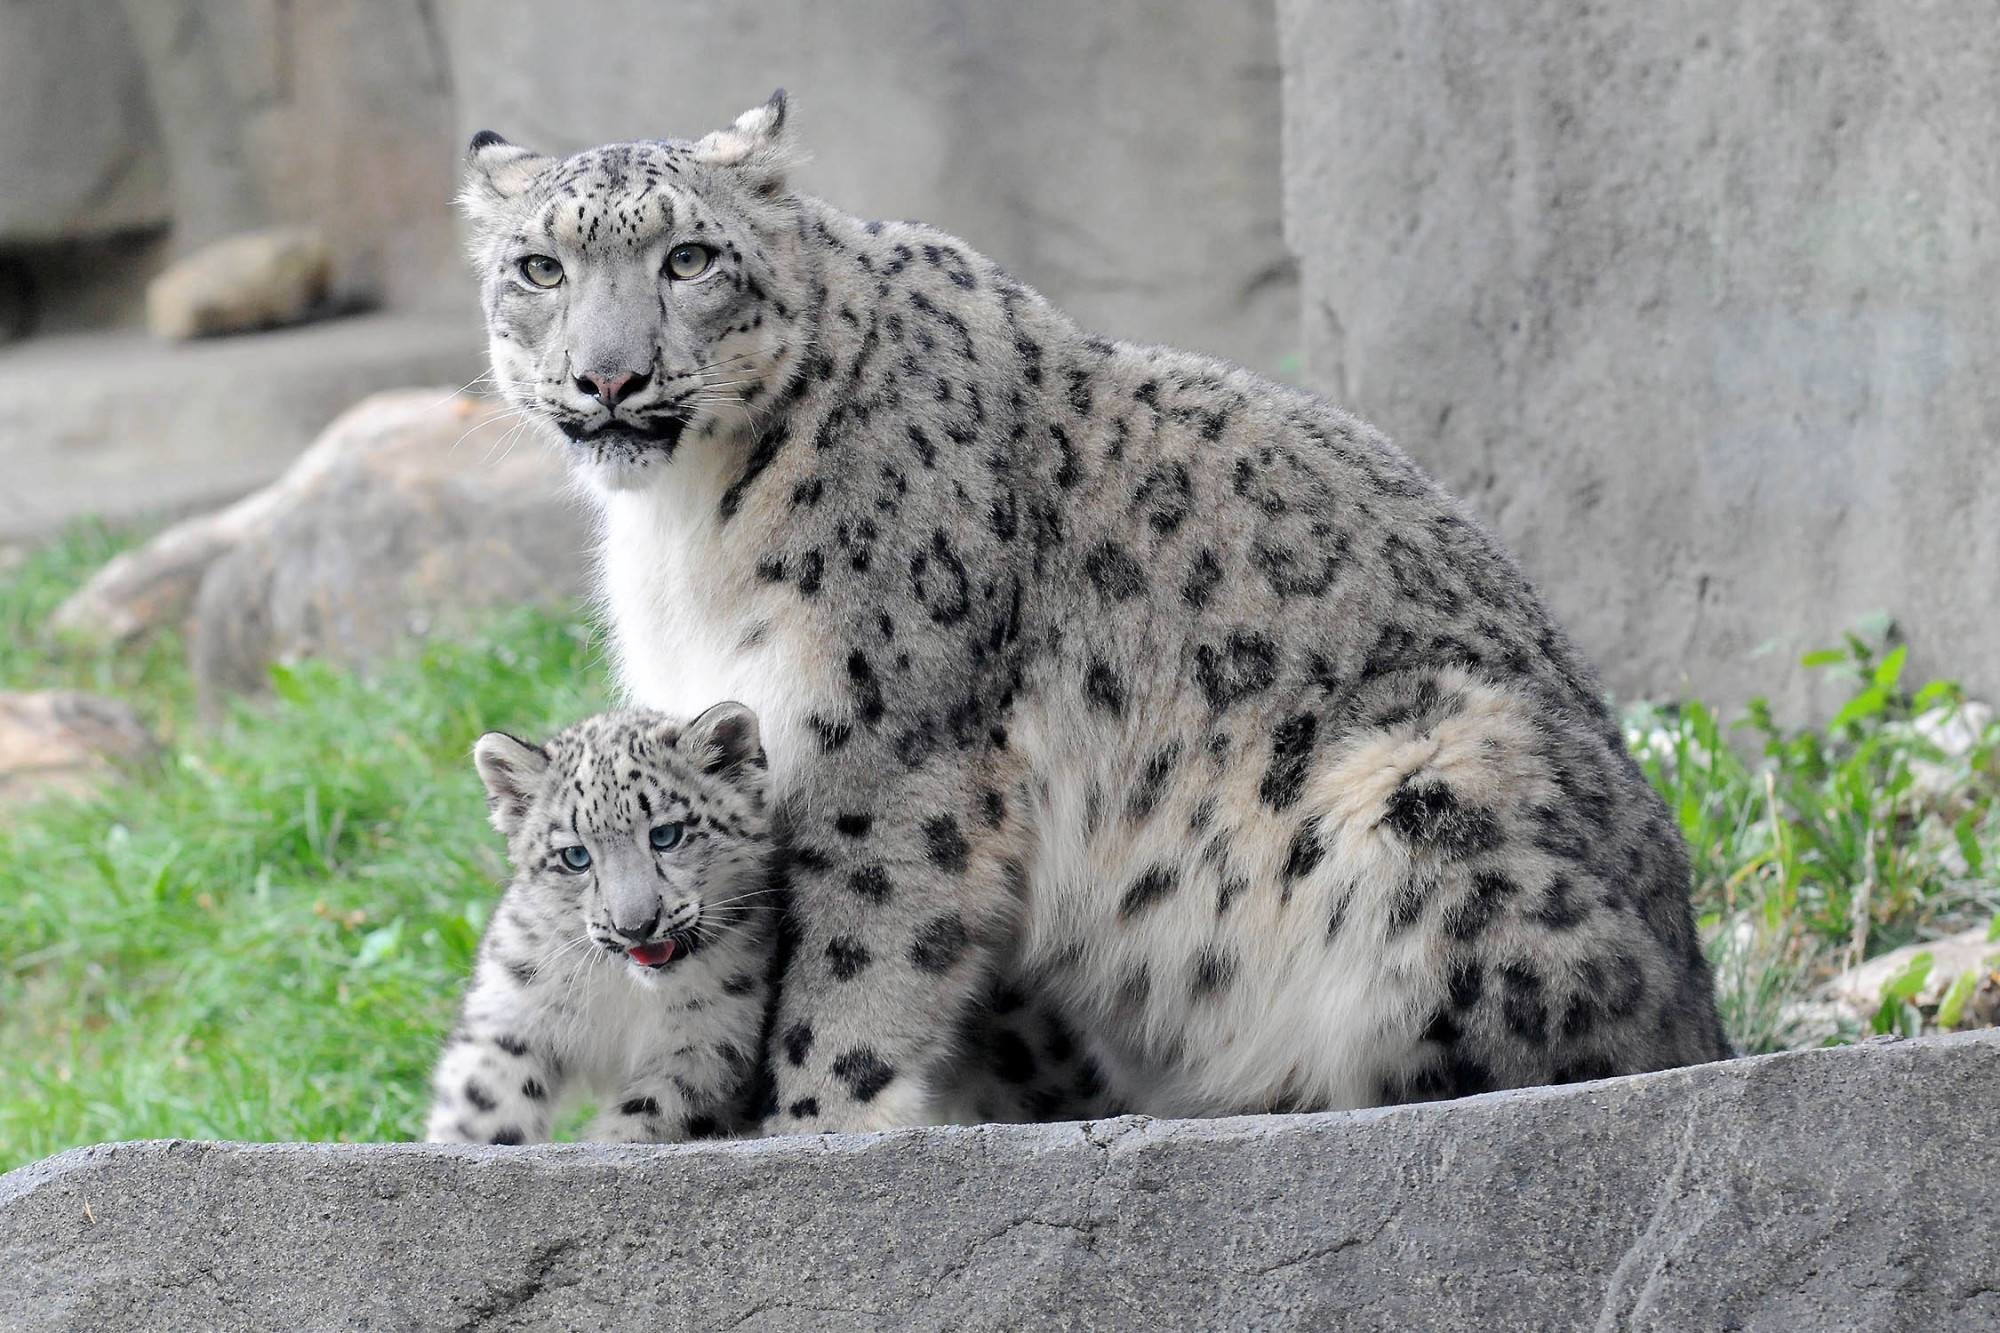 2000x1333 Best Snow Leopard Wallpapers in High Quality, Sharla Riser for PC & Mac,  Laptop, Tablet, Mobile Phone